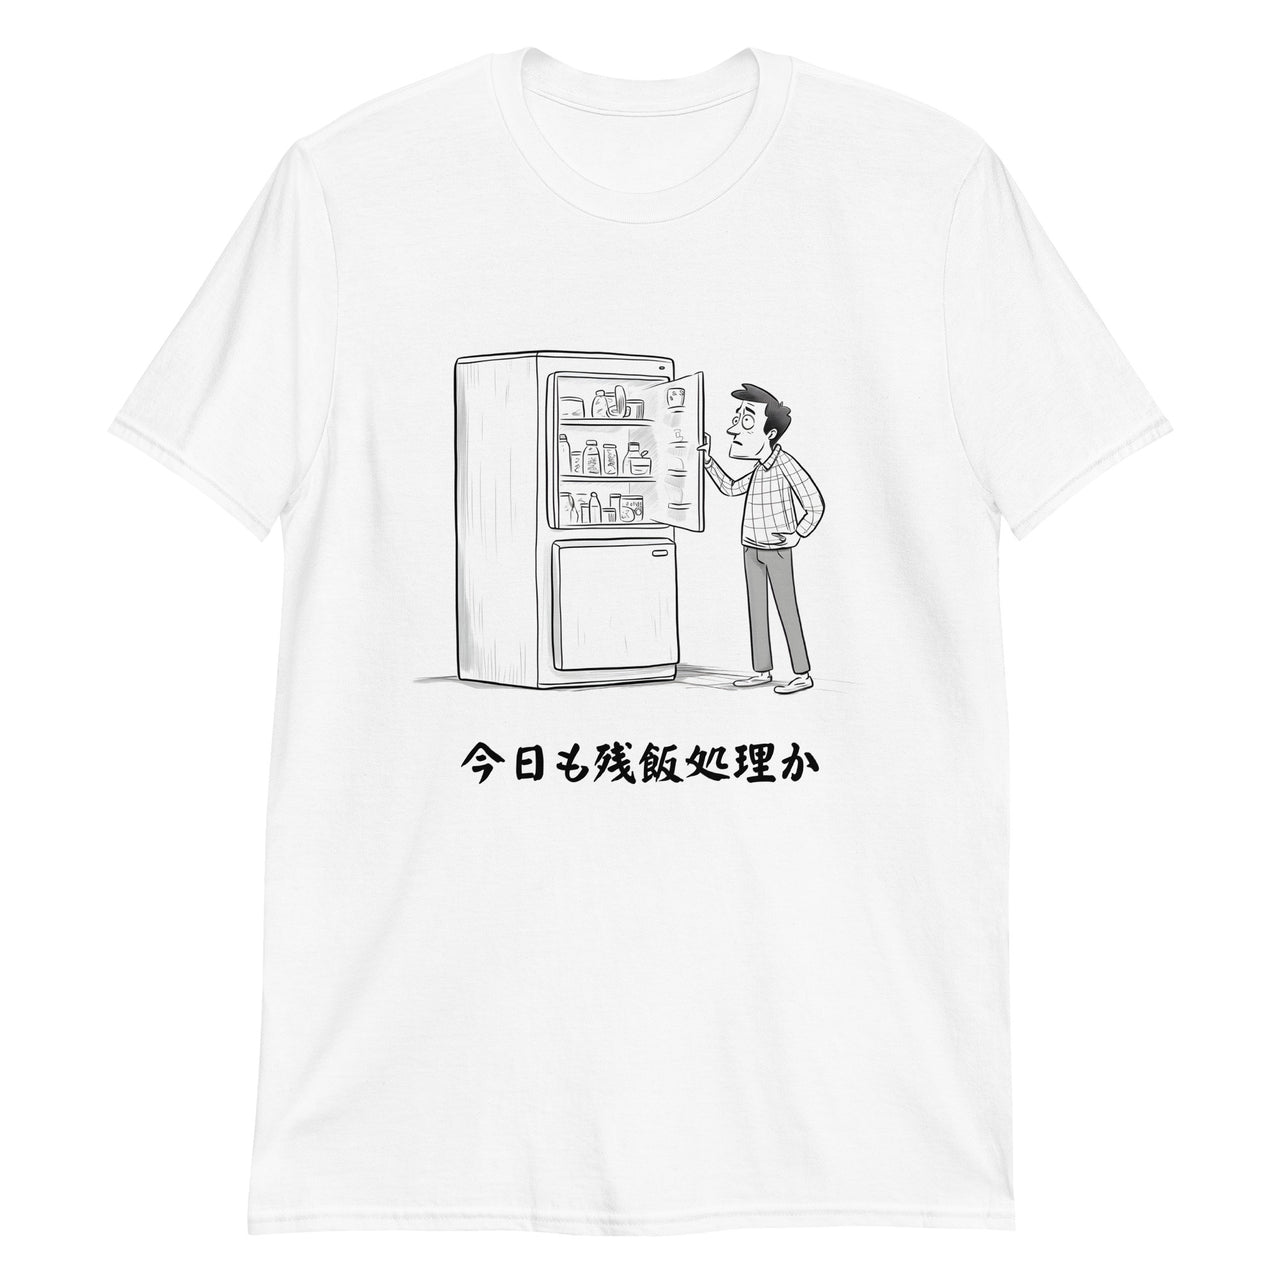 Today is Also Leftovers in Japanese T-Shirt